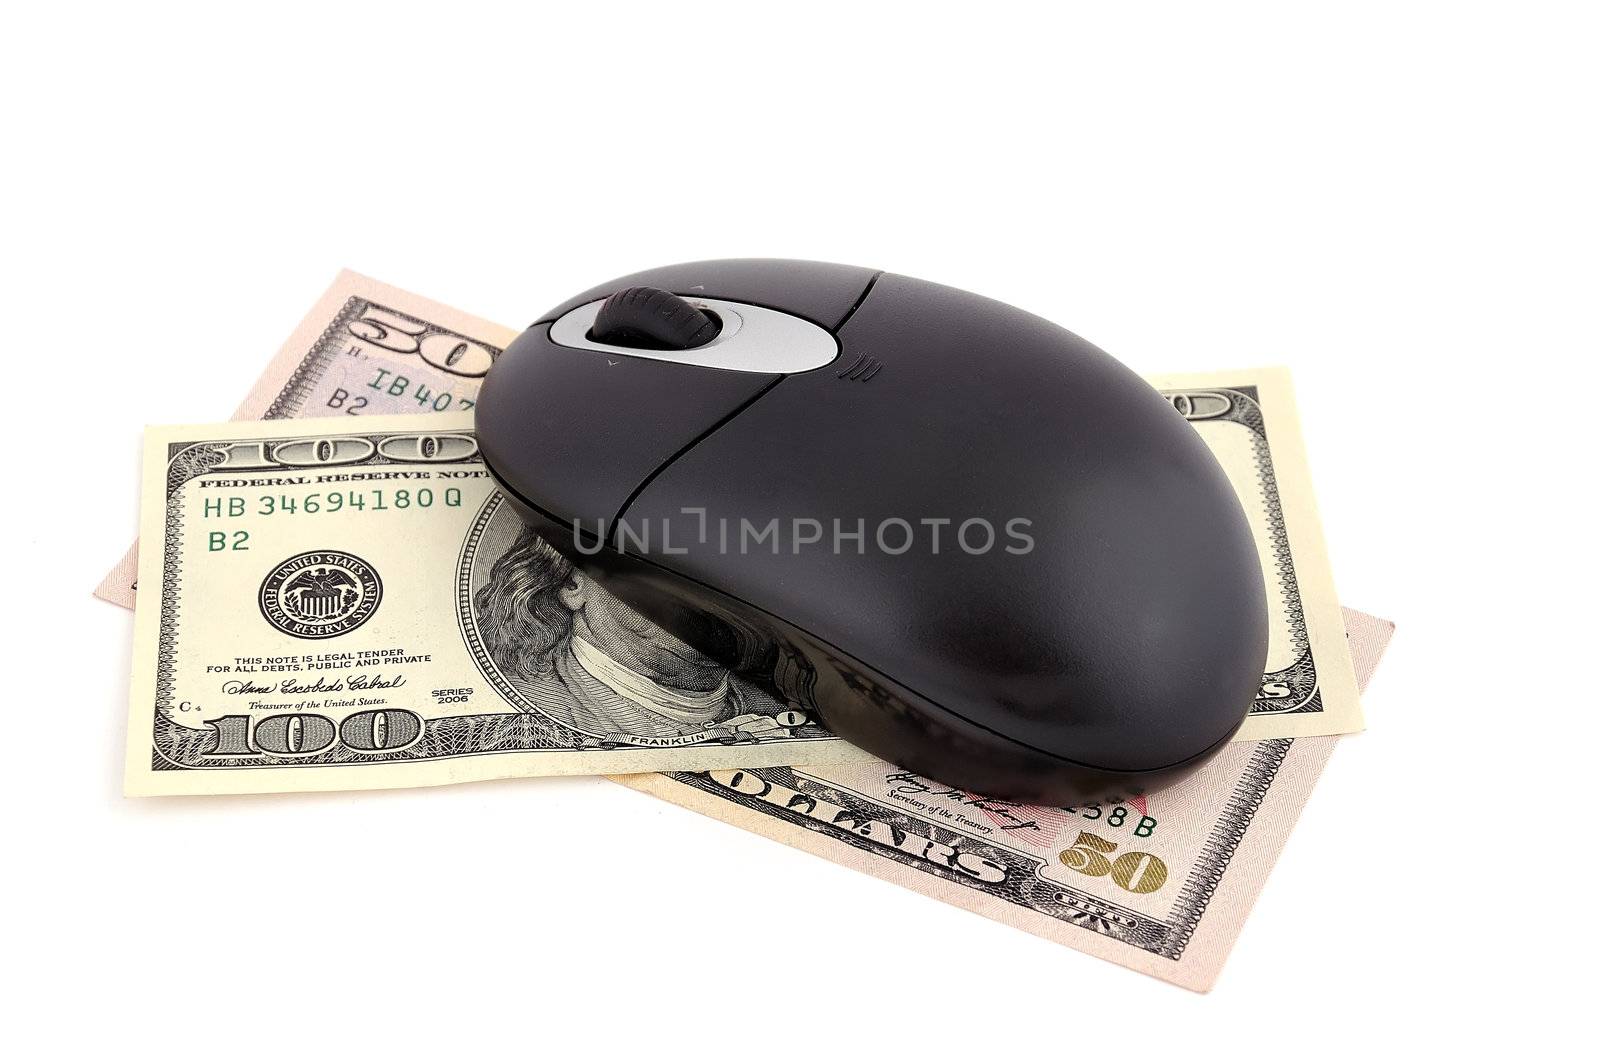 wireless mouse and dollars by vetkit